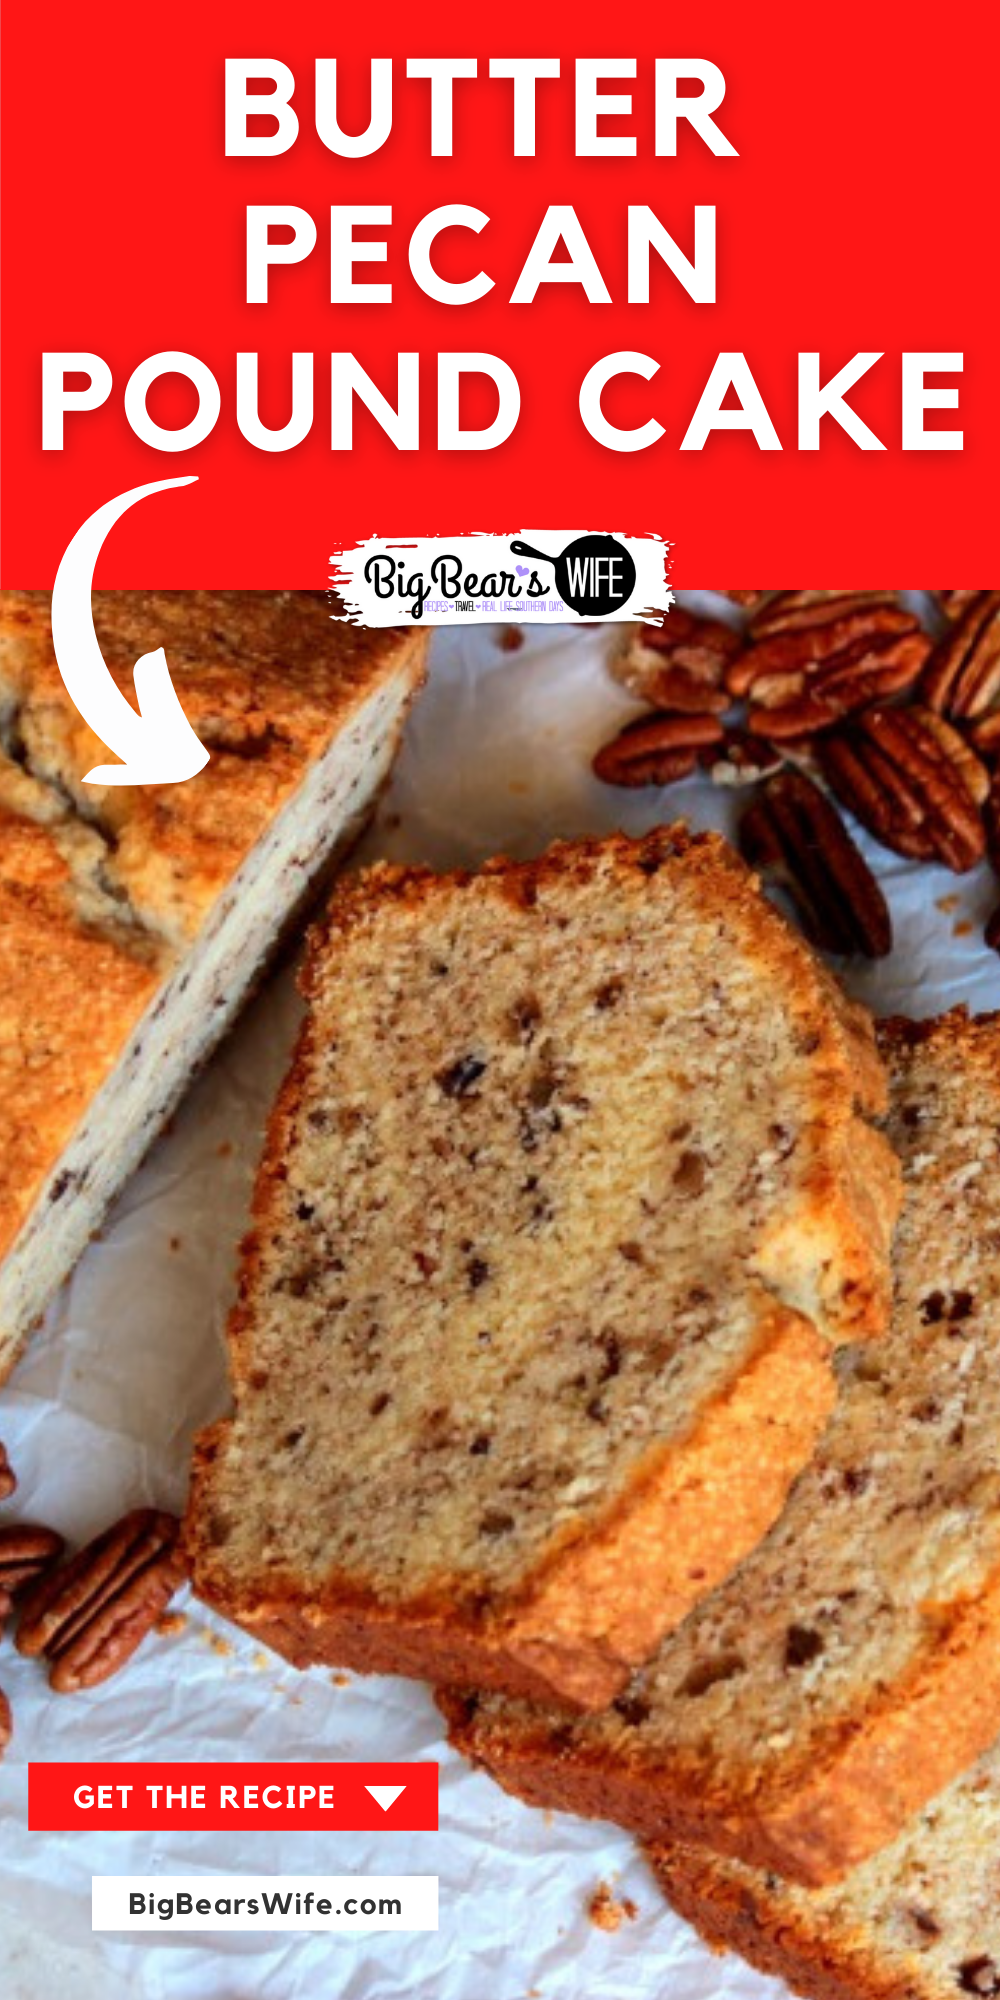 Butter Pecan Pound Cake - A perfect pound cake to whip up for your family or as a gift for friends! This homemade Butter Pecan Pound Cake is delicious and it's my version of a favorite pound cake that we get from the local farmer's market! via @bigbearswife